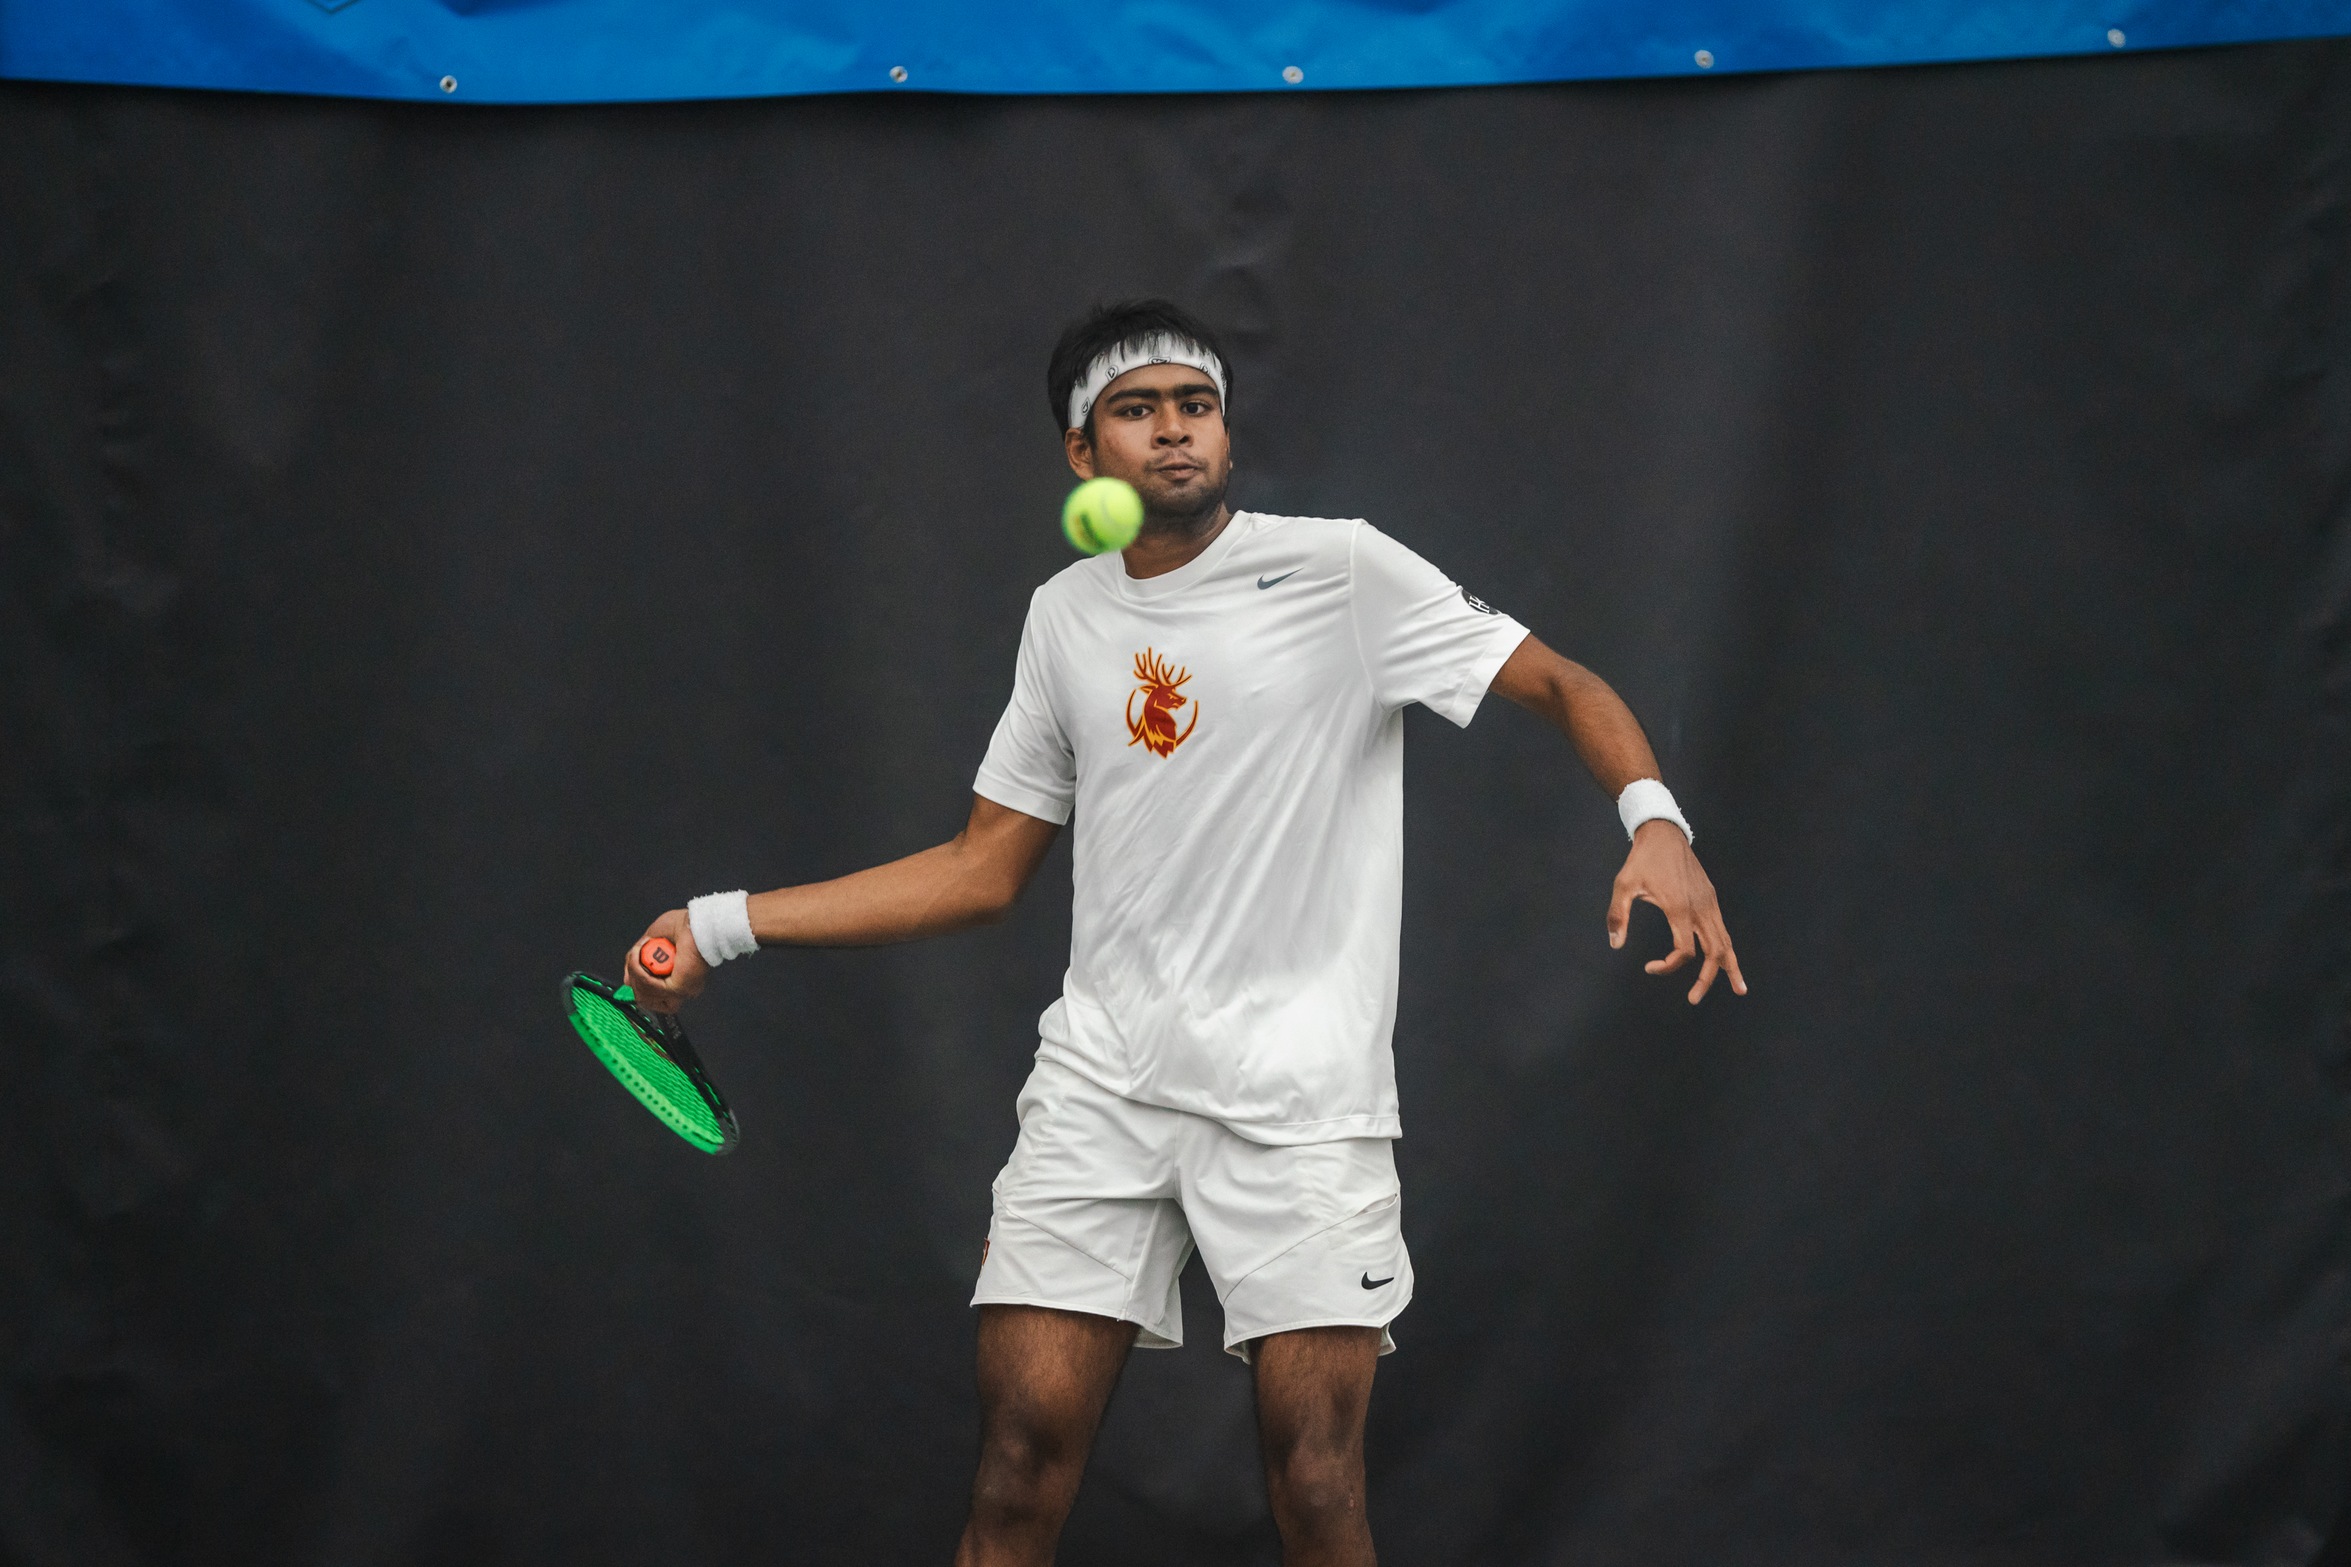 Freshman Ani Gupta was a straight set winner at No. 5 singles in CMS' opening round win against Trinity University at the D3 ITA National Team Indoor Championships